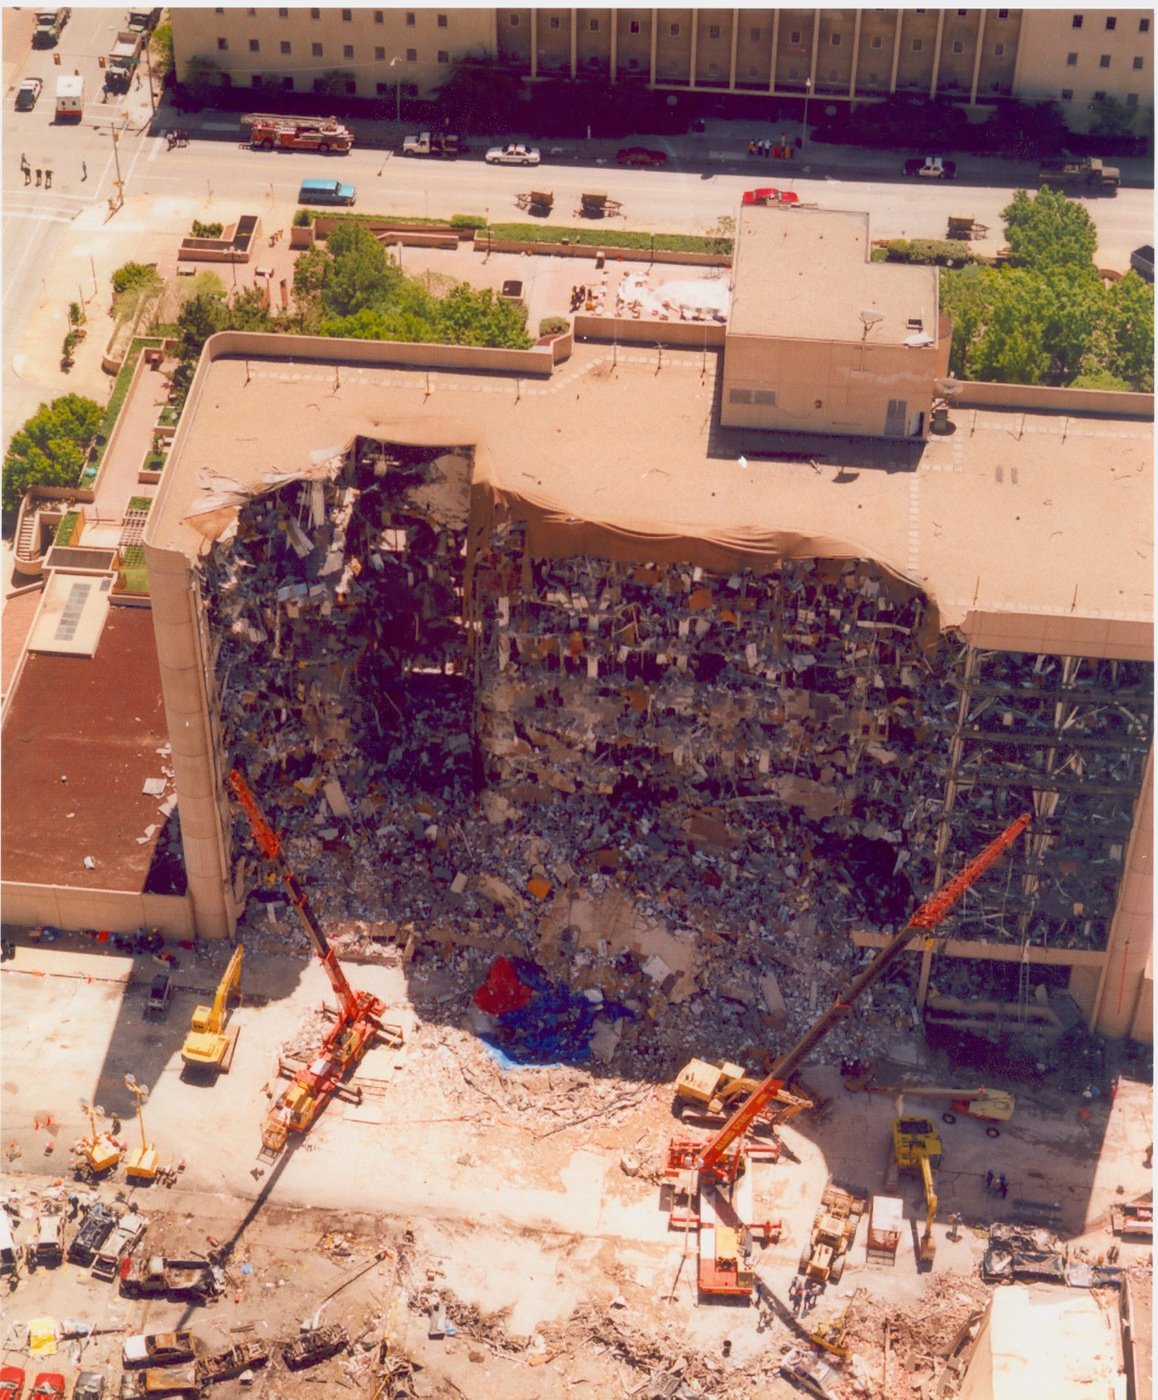 Aerial view of the aftermath of truck bombing of the Aflred P. Murrah federal building in Oklahoma City in April 1995.